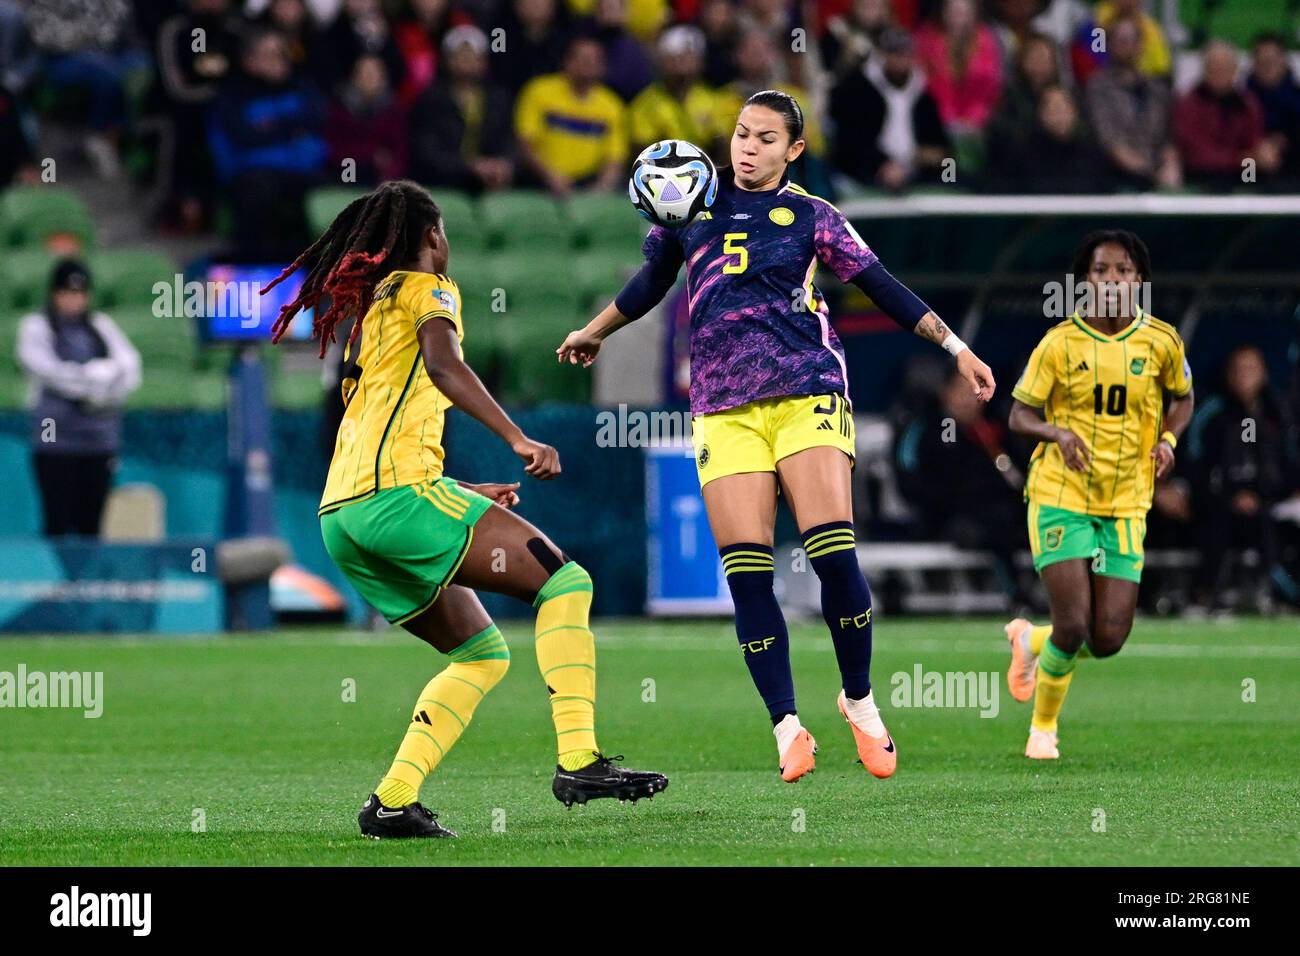 Melbourne, Australia, August 8th 2023: Lorena Bedoya Durango (Colombia 5) during the 2023 FIFA Womens World Cup Round of 16 football match between Colombia v Jamaica at Melbourne Rectangular Stadium in Melbourne, Australia.  (Richard Callis / SPP) Stock Photo